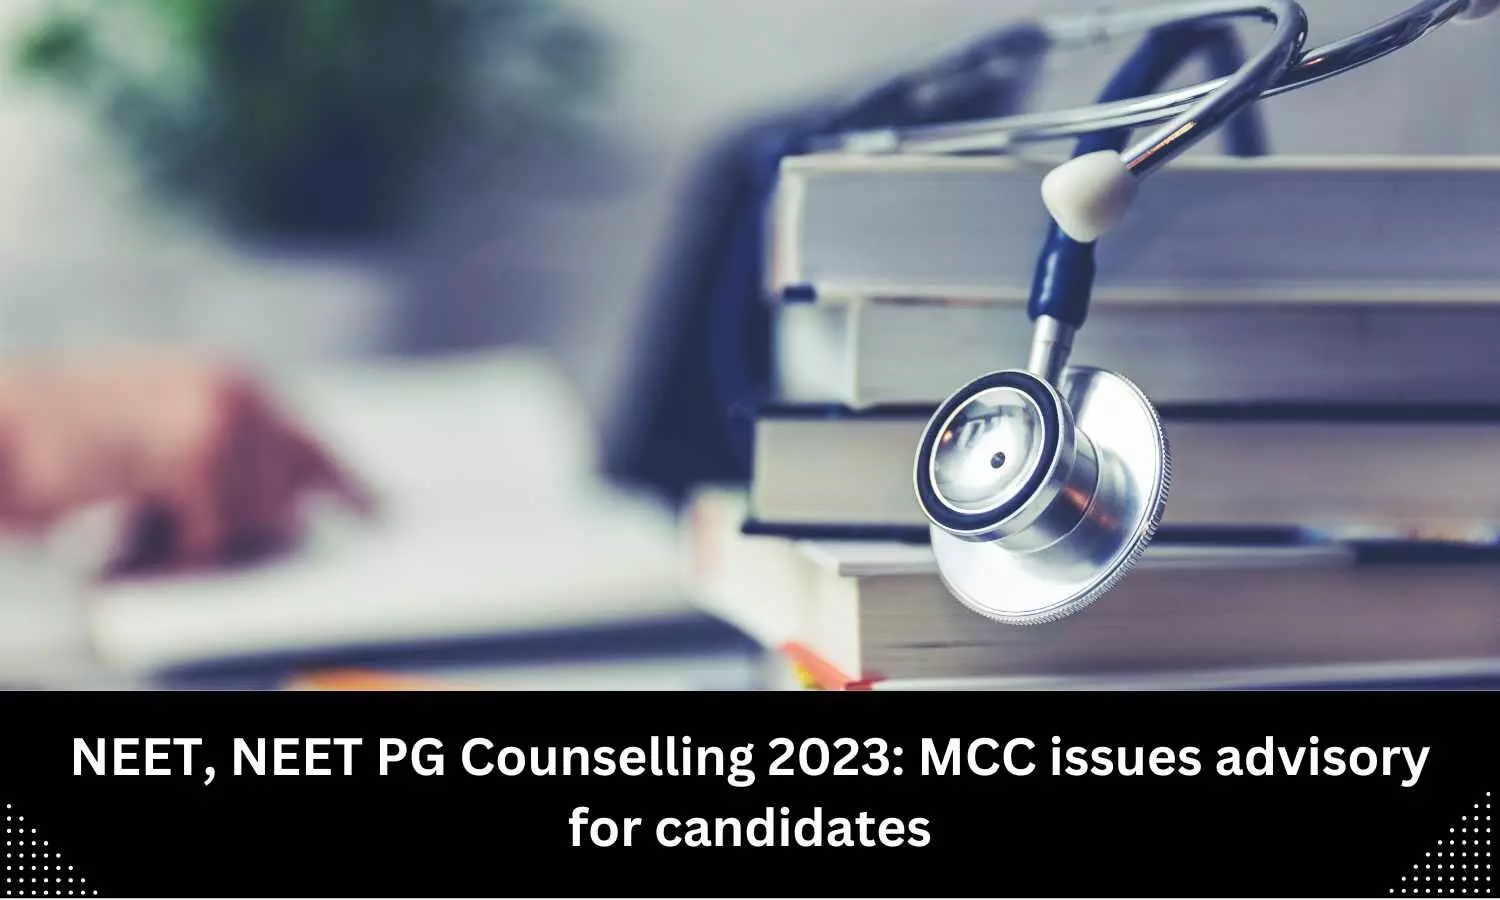 MCC issues advisory for candidates participating in NEET UG/PG Counselling 2023